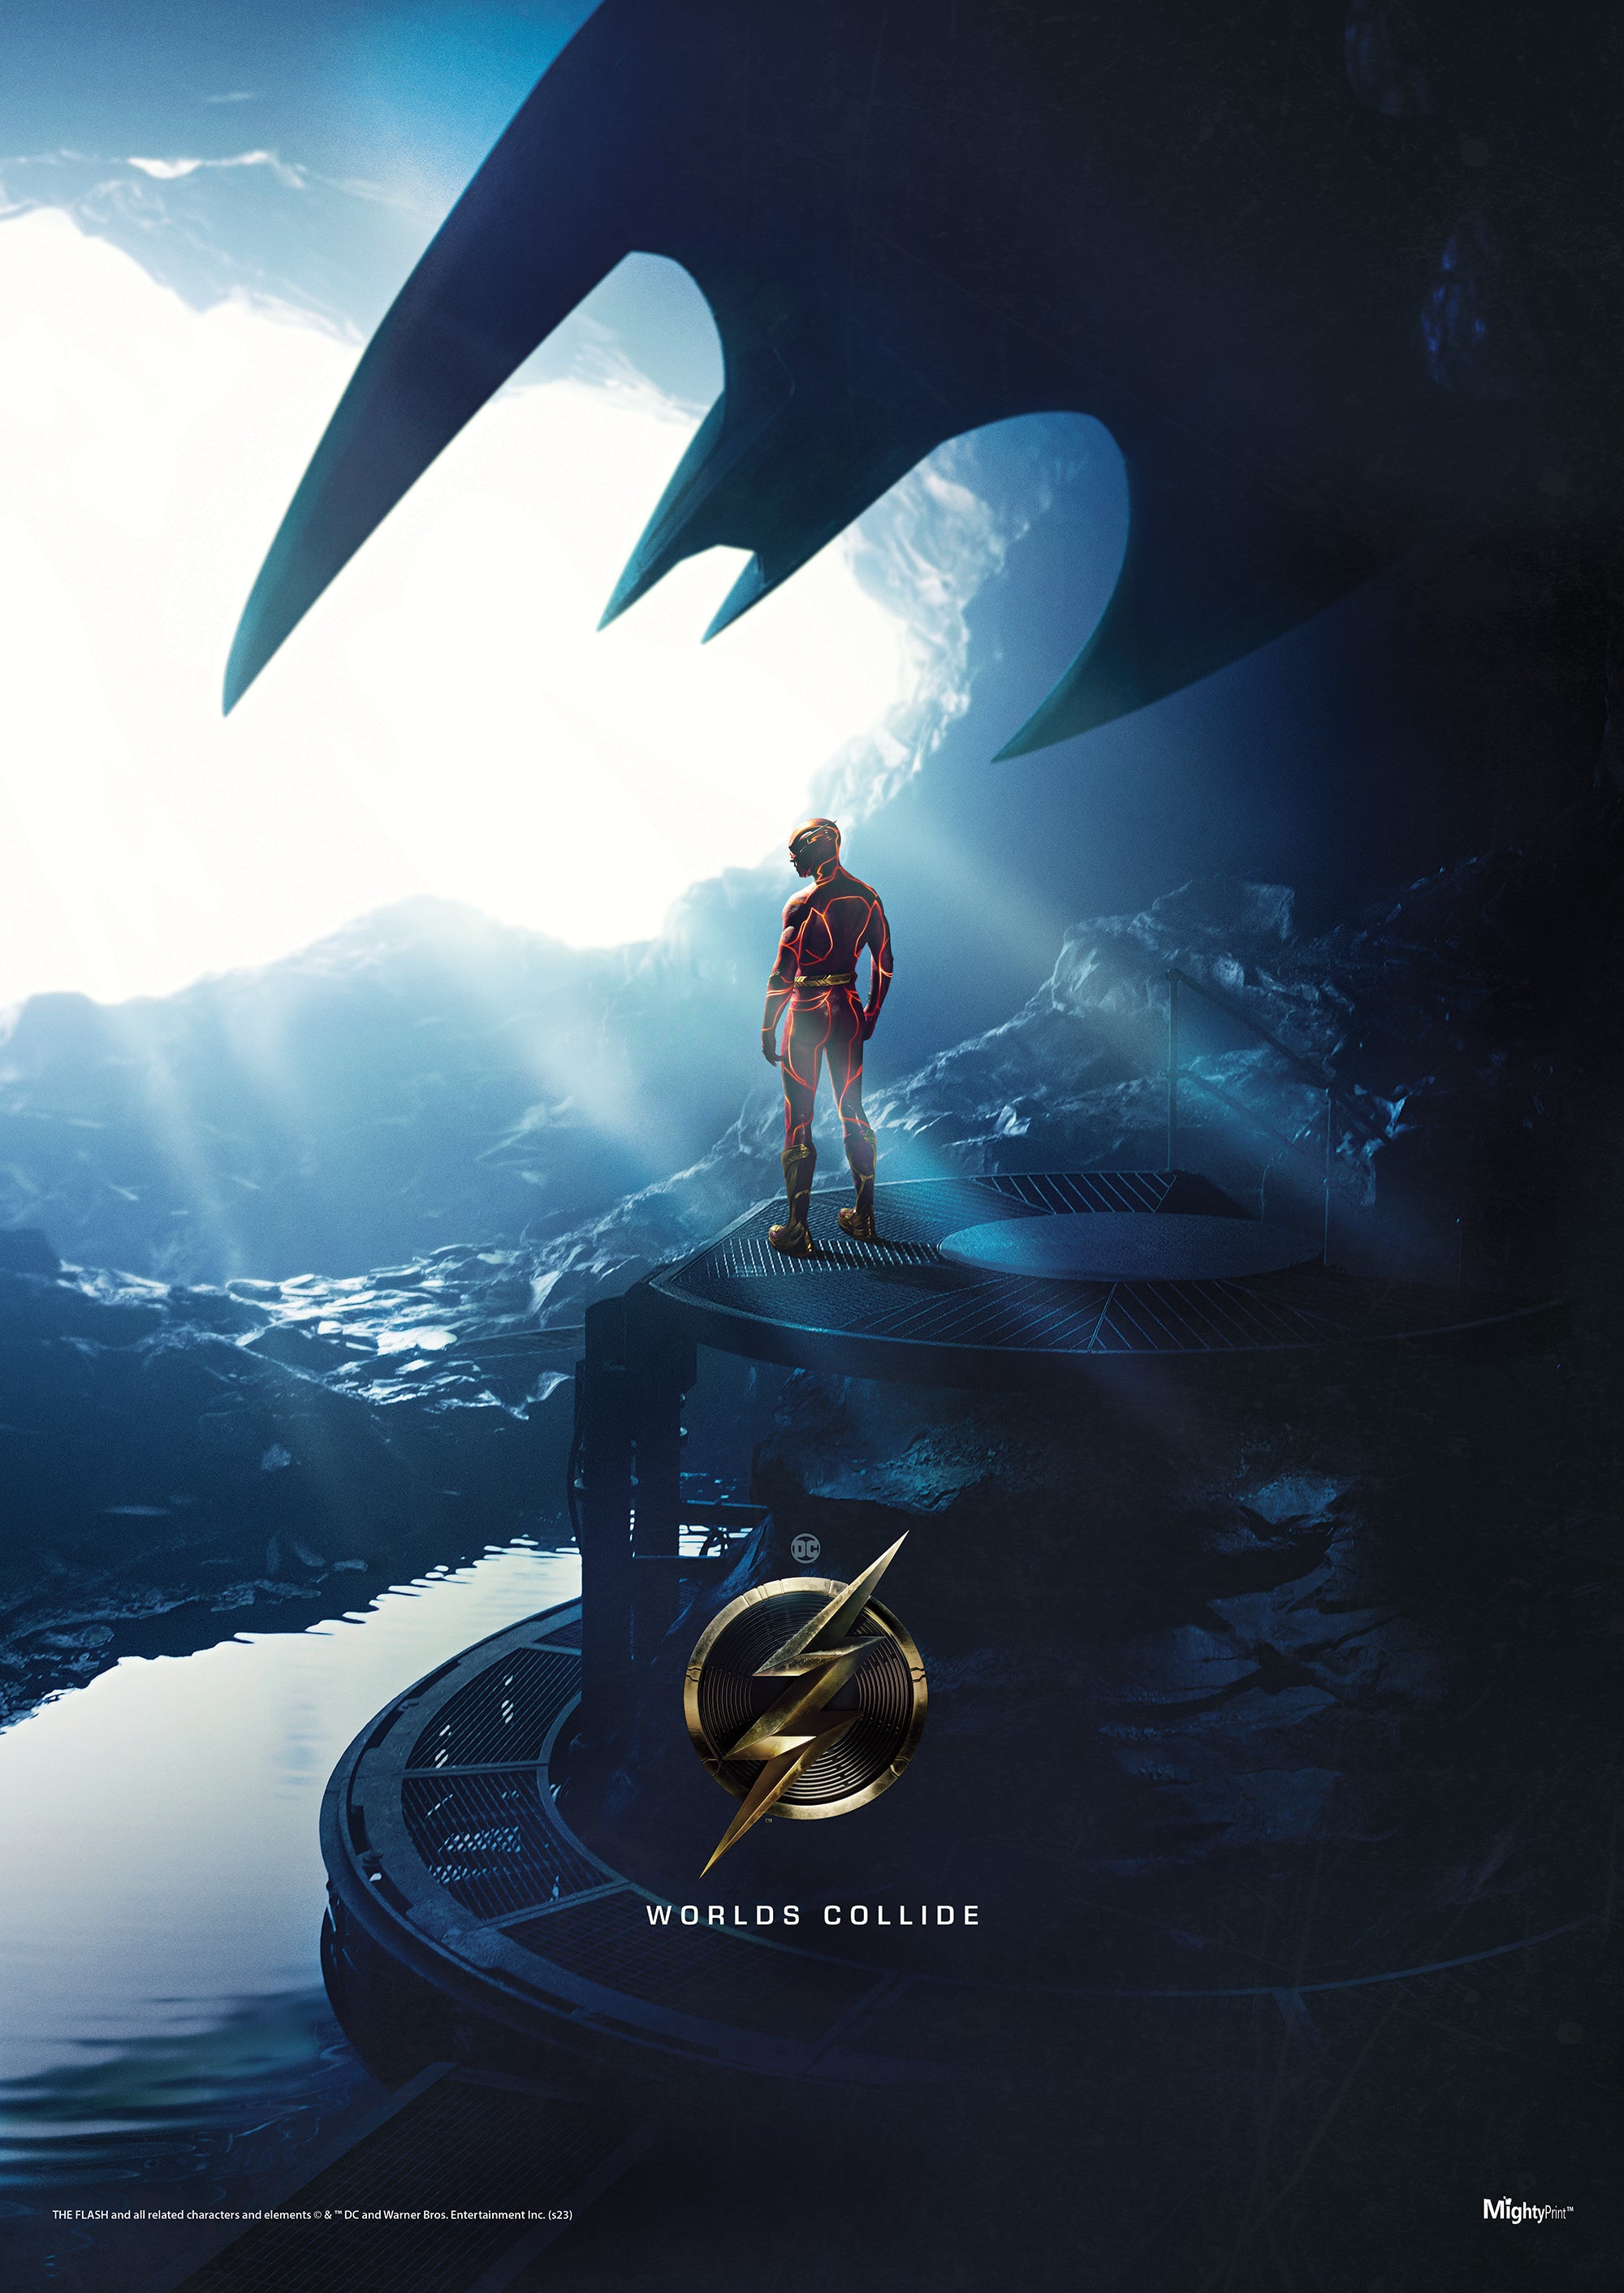 The Flash (The Flash Movie Poster) MightyPrint™ Wall Art MP17240882